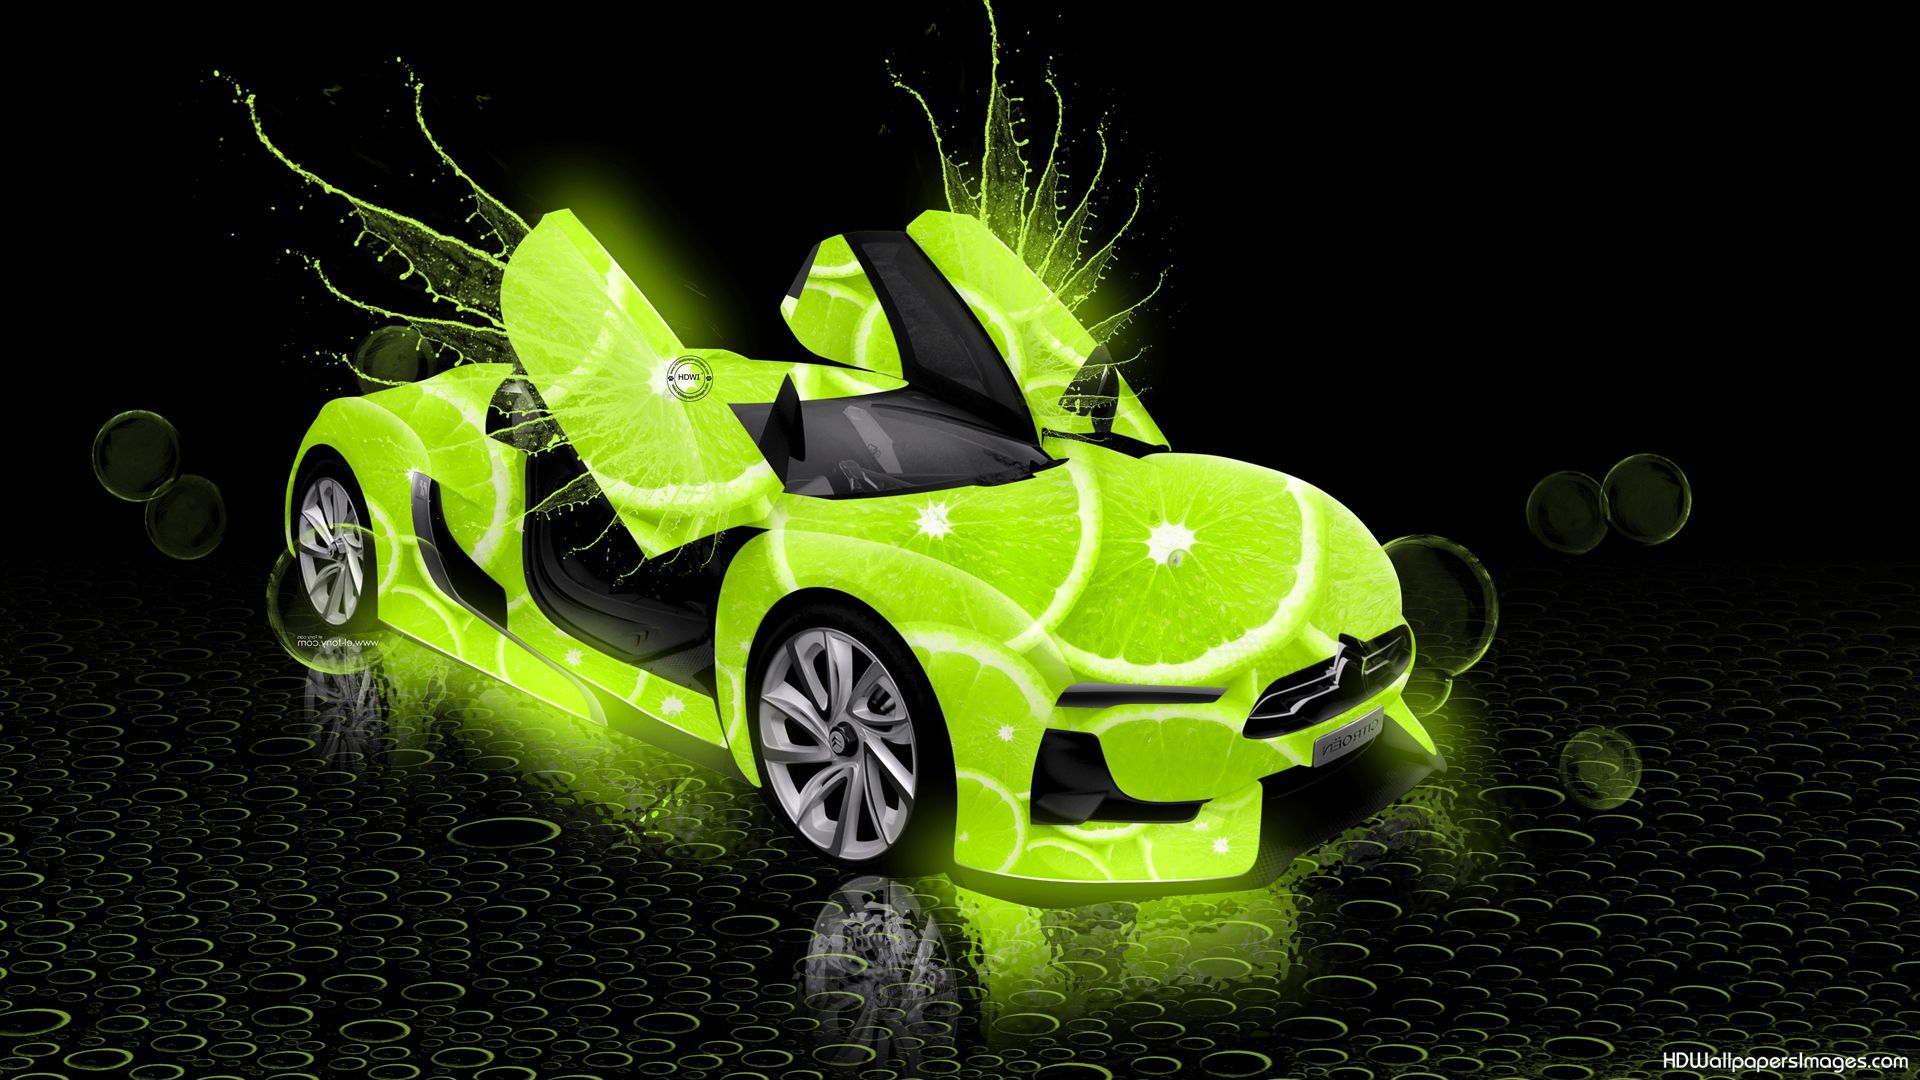 Abstract Car Wallpaper Free Abstract Car Background